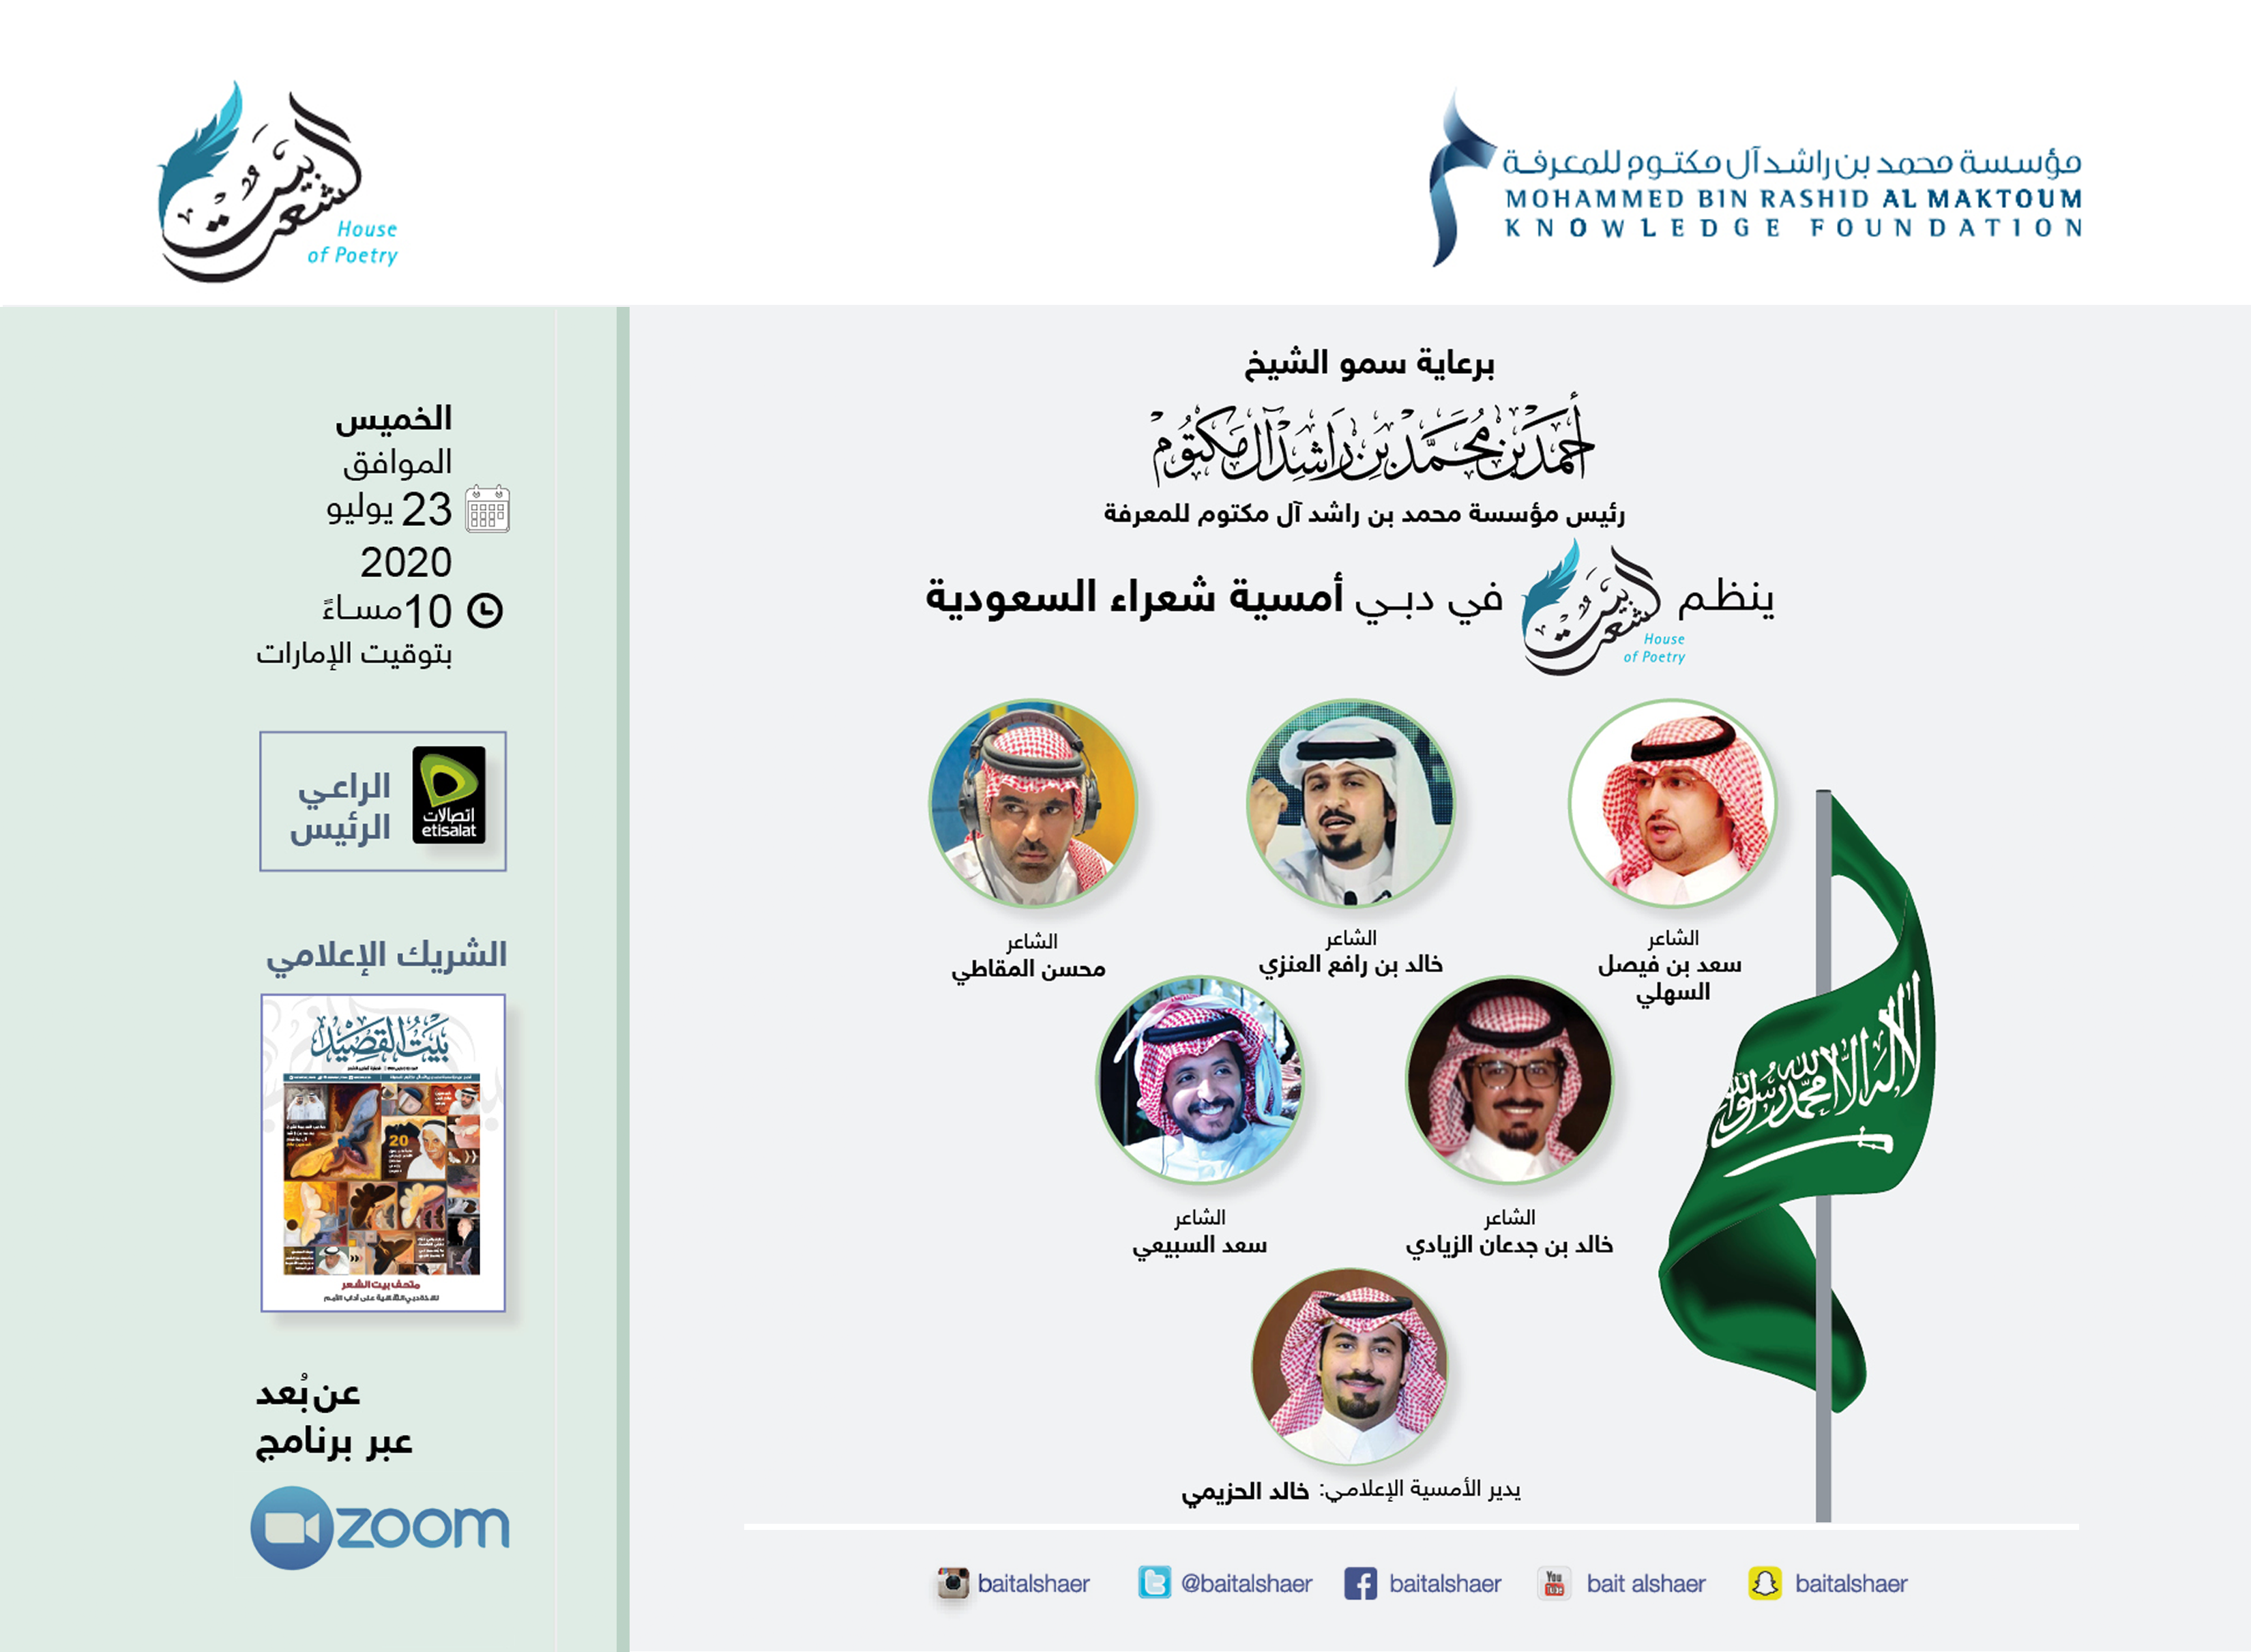 A virtual poetry evening for the House of Poetry in Dubai for Saudi poets